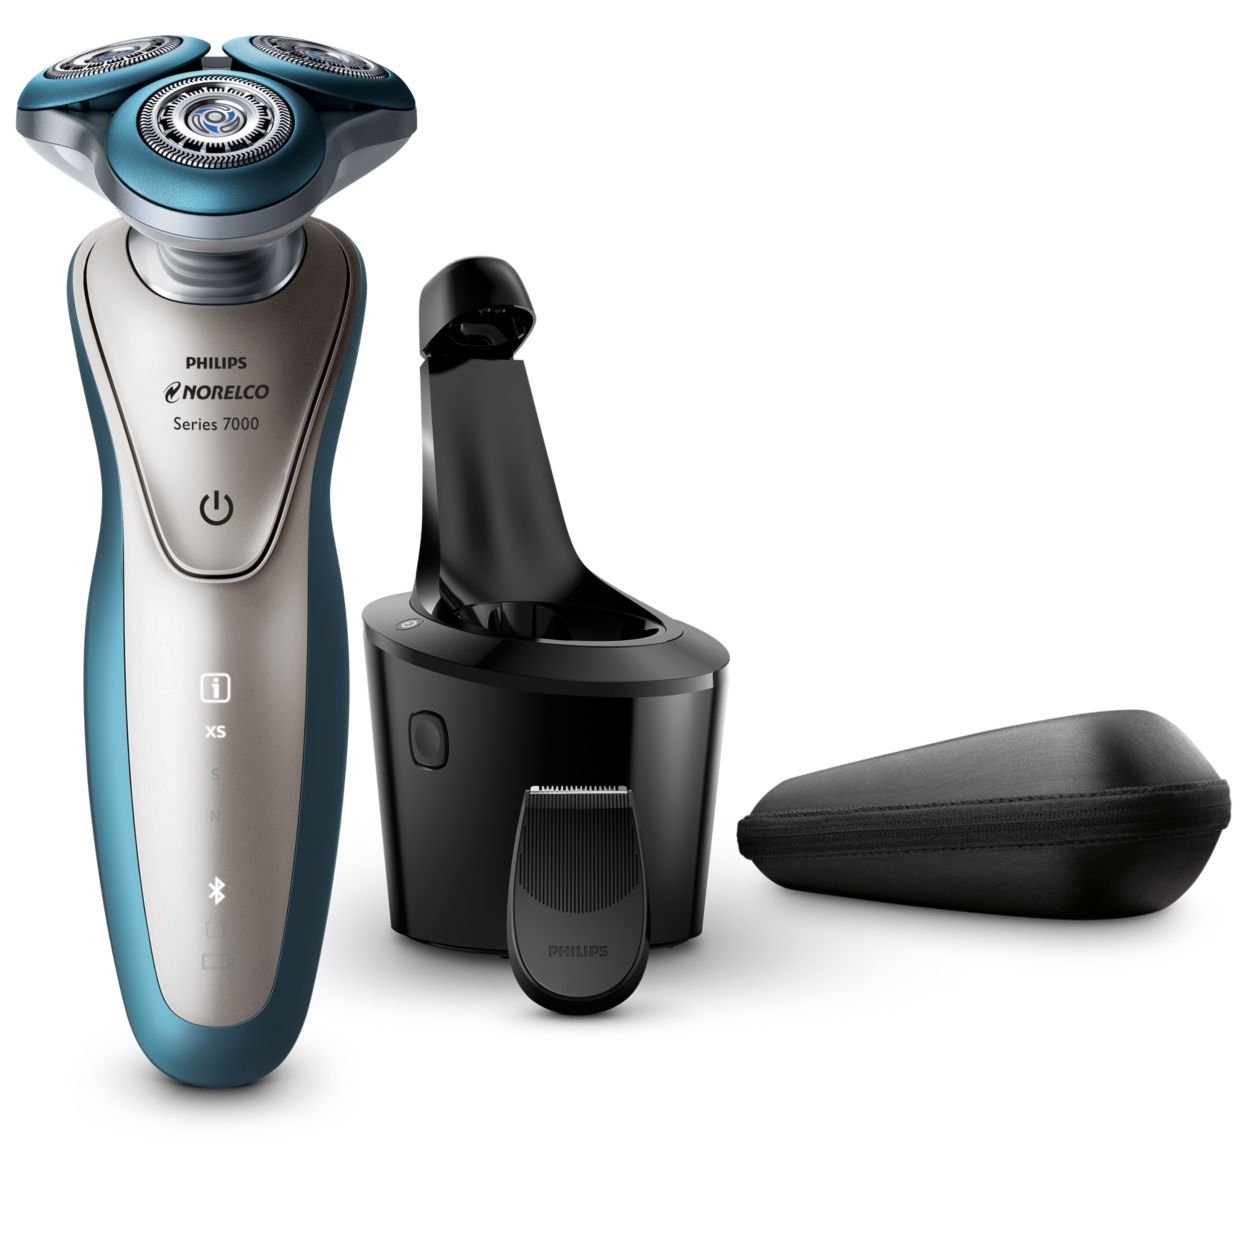 Philips Norelco Shaver 7700 Review: Should You Buy It? • ShaverCheck